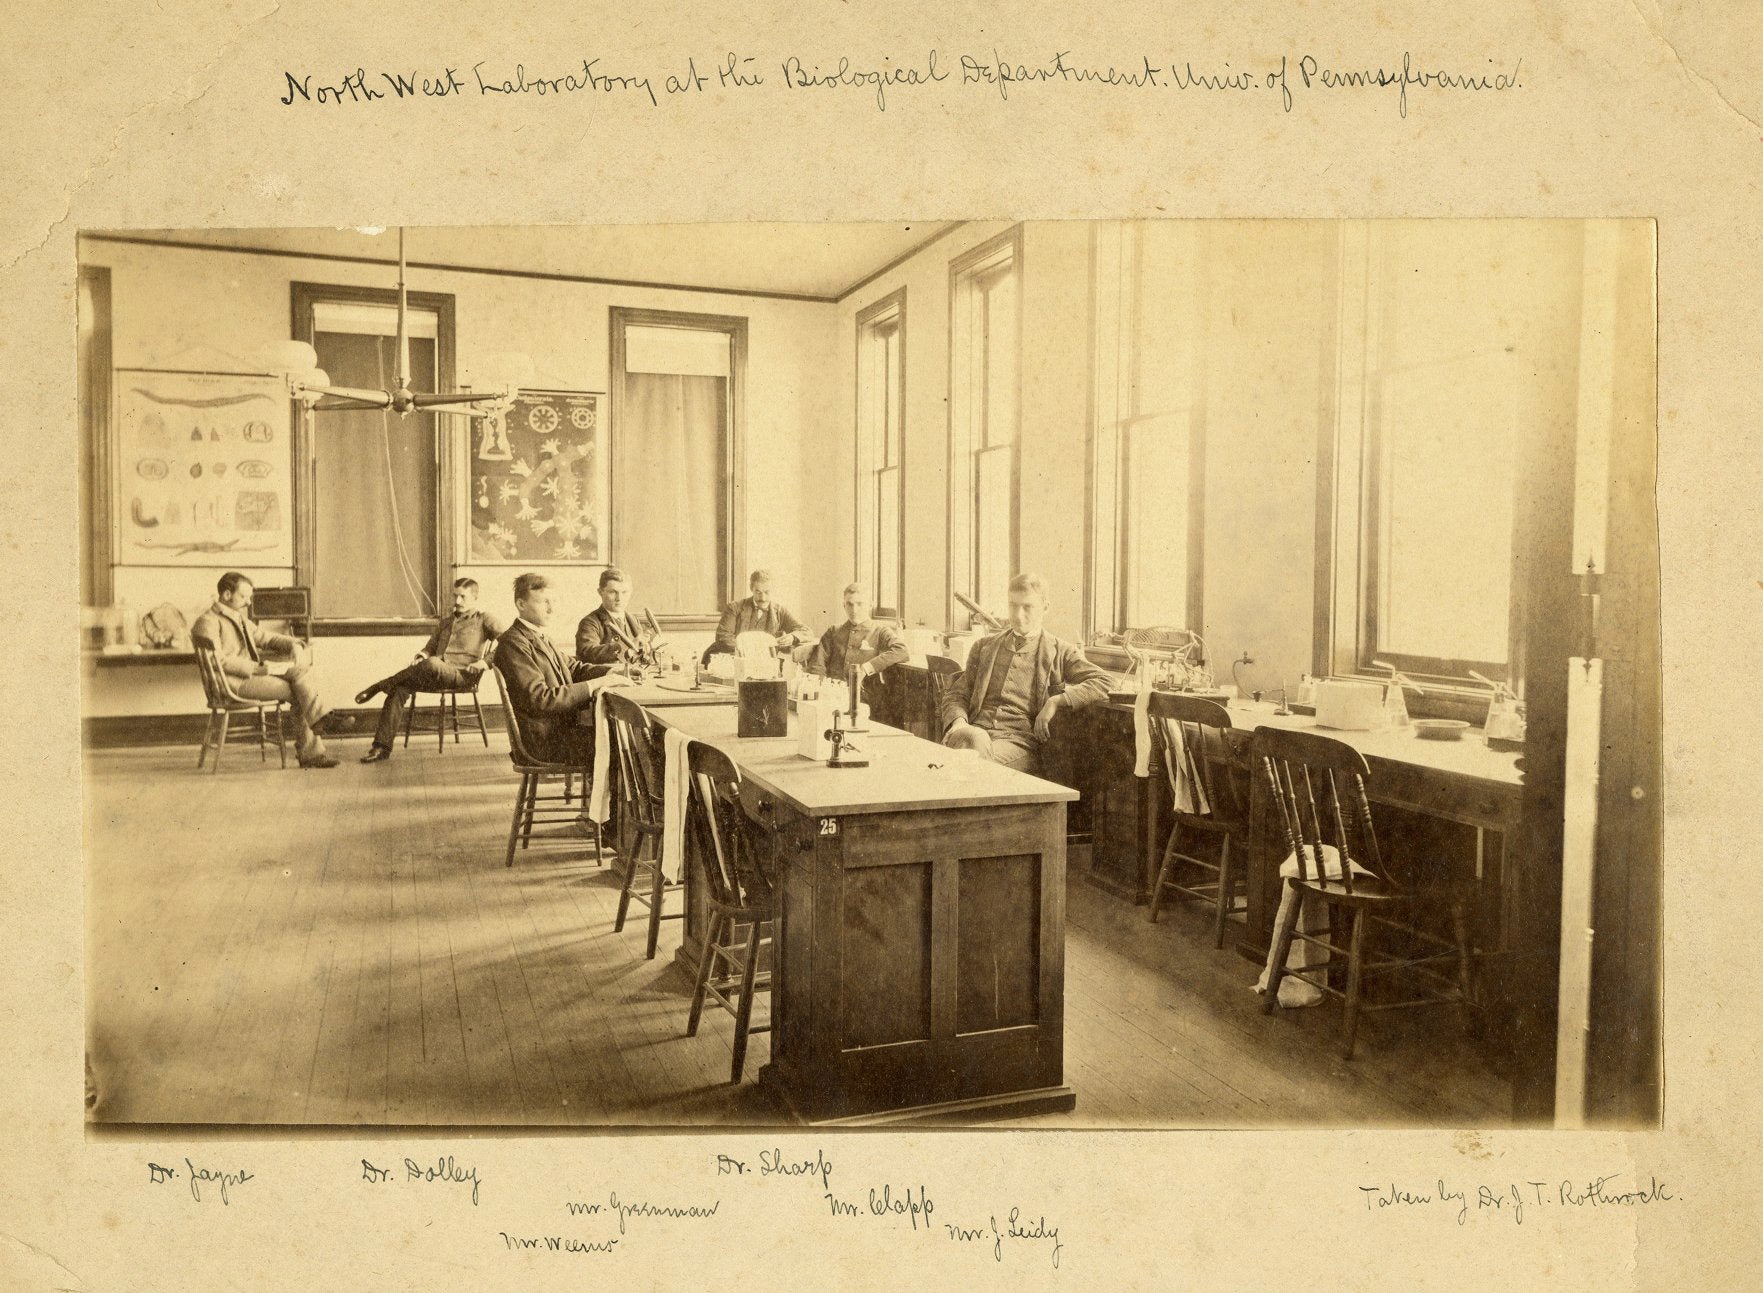 Biological Hall, interior, faculty members in northwest laboratory, c. 1885